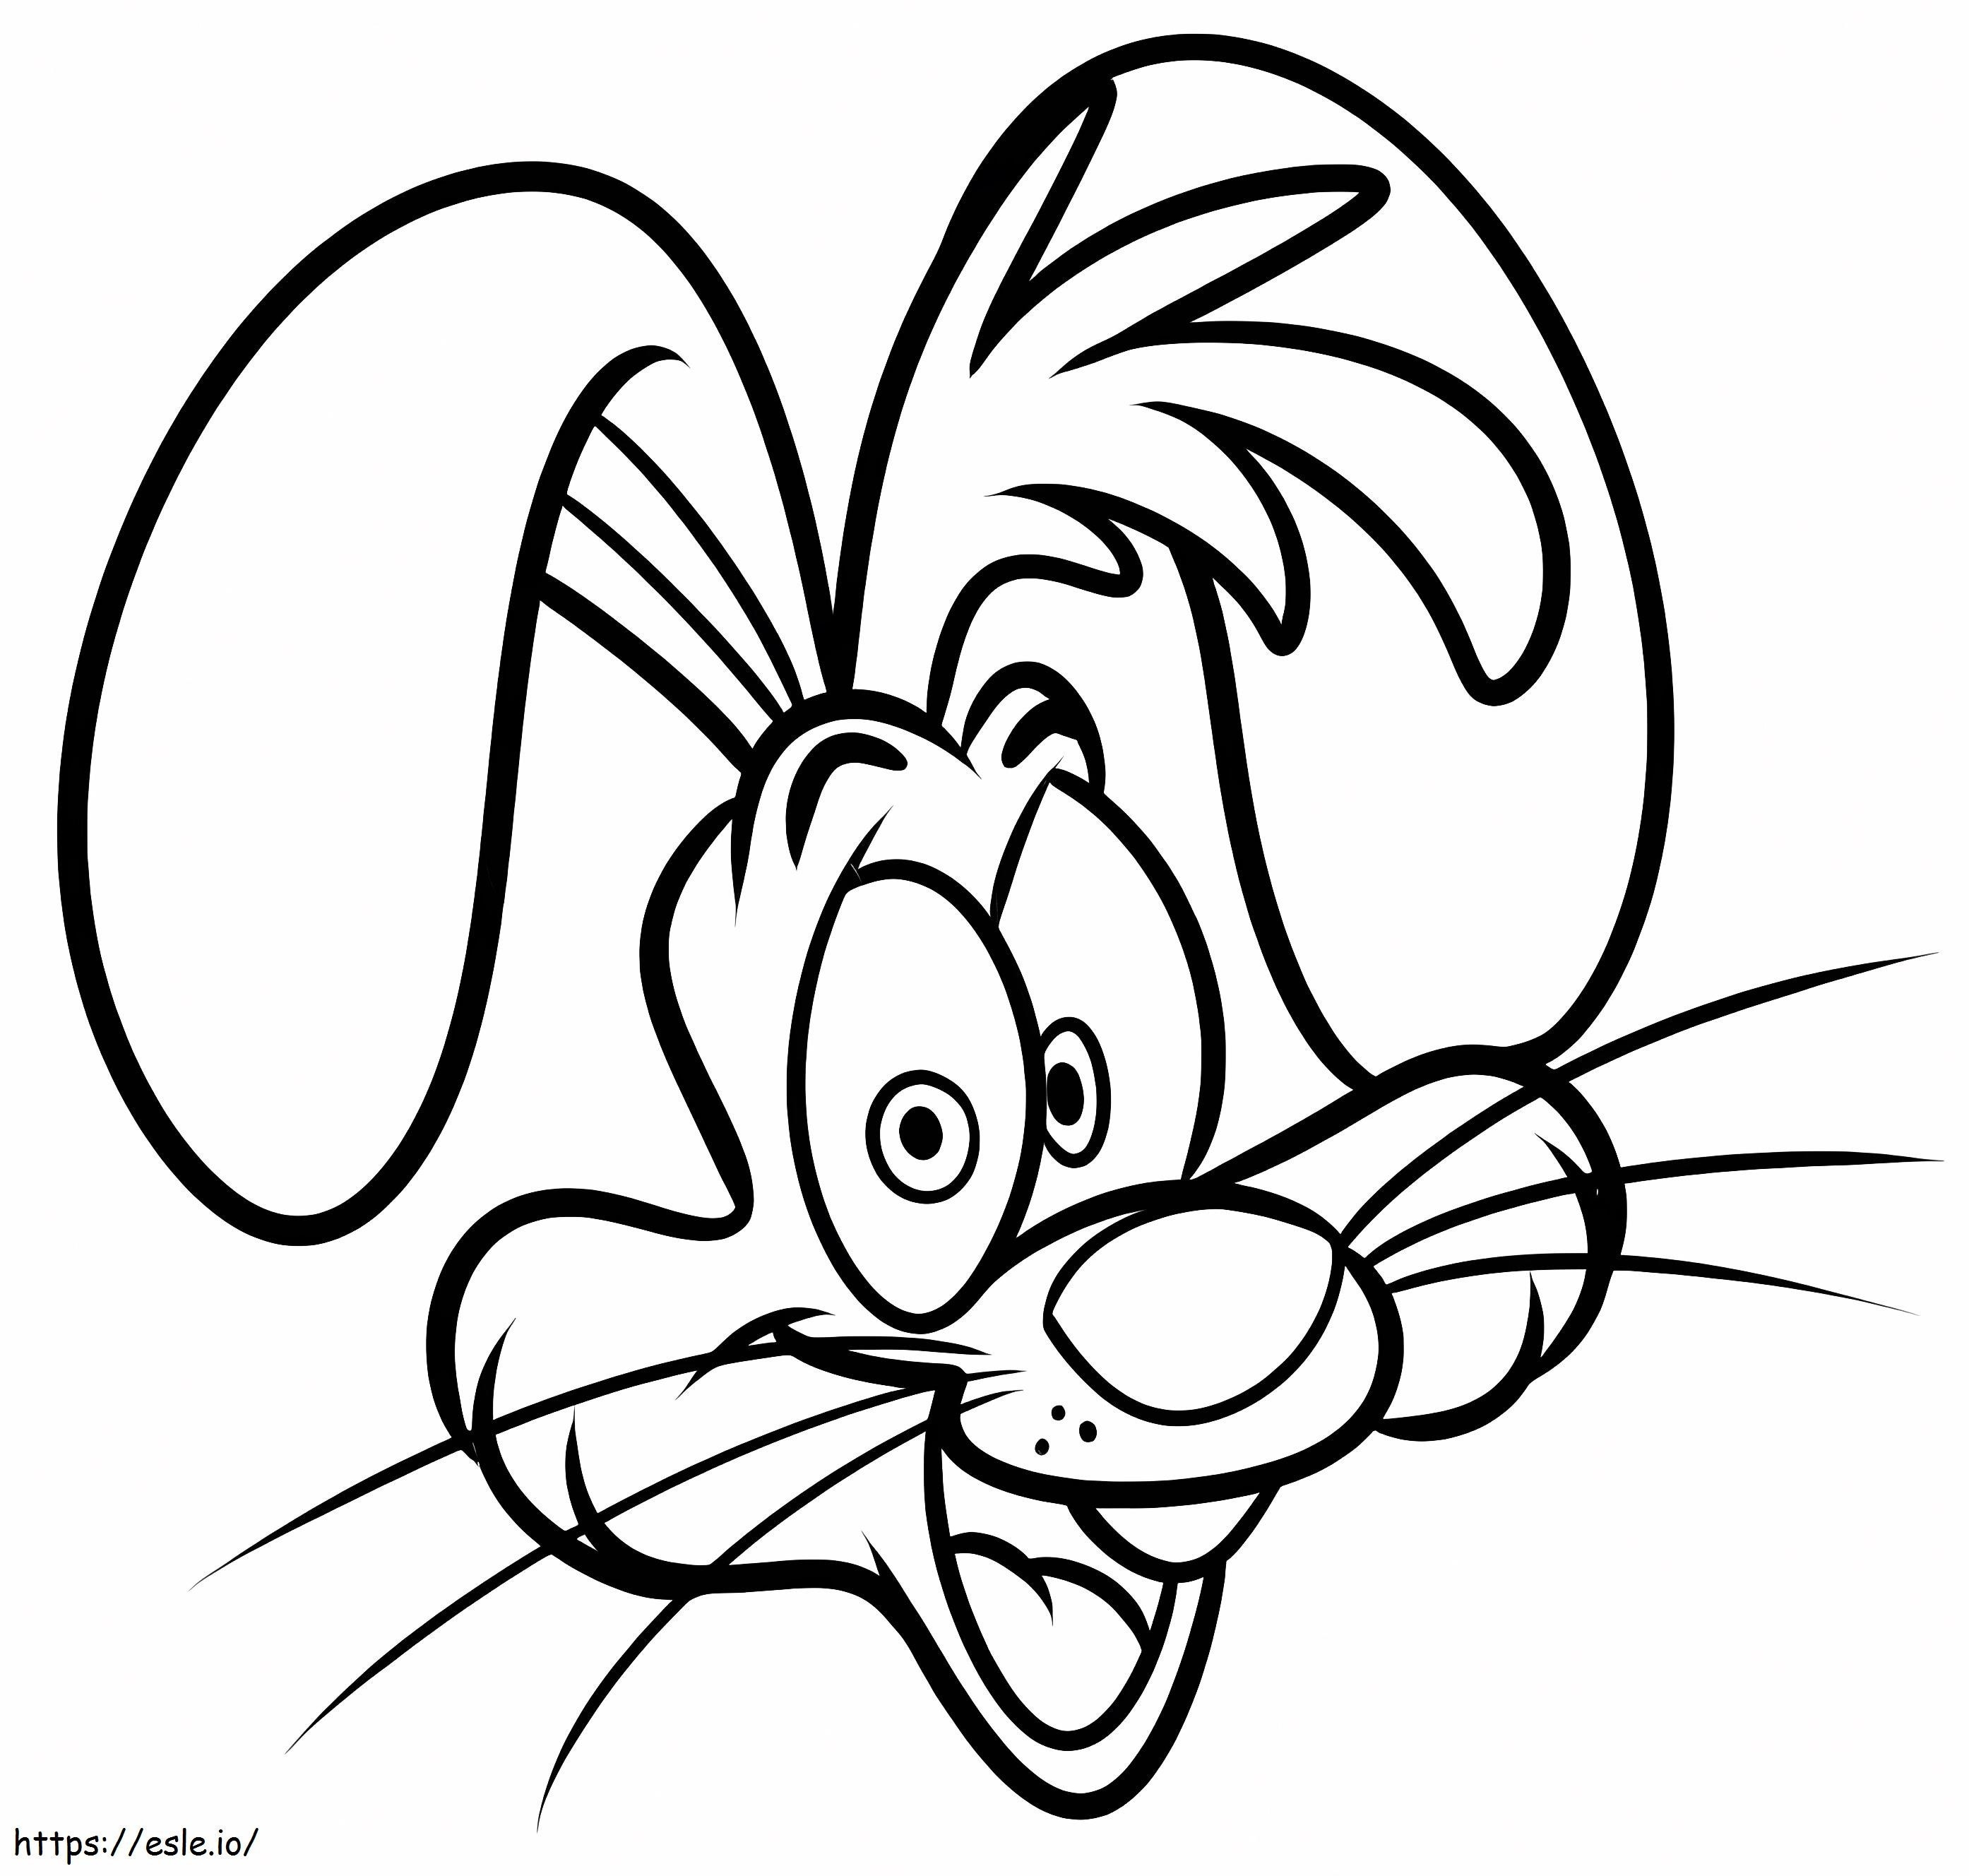 Roger Rabbits Face coloring page